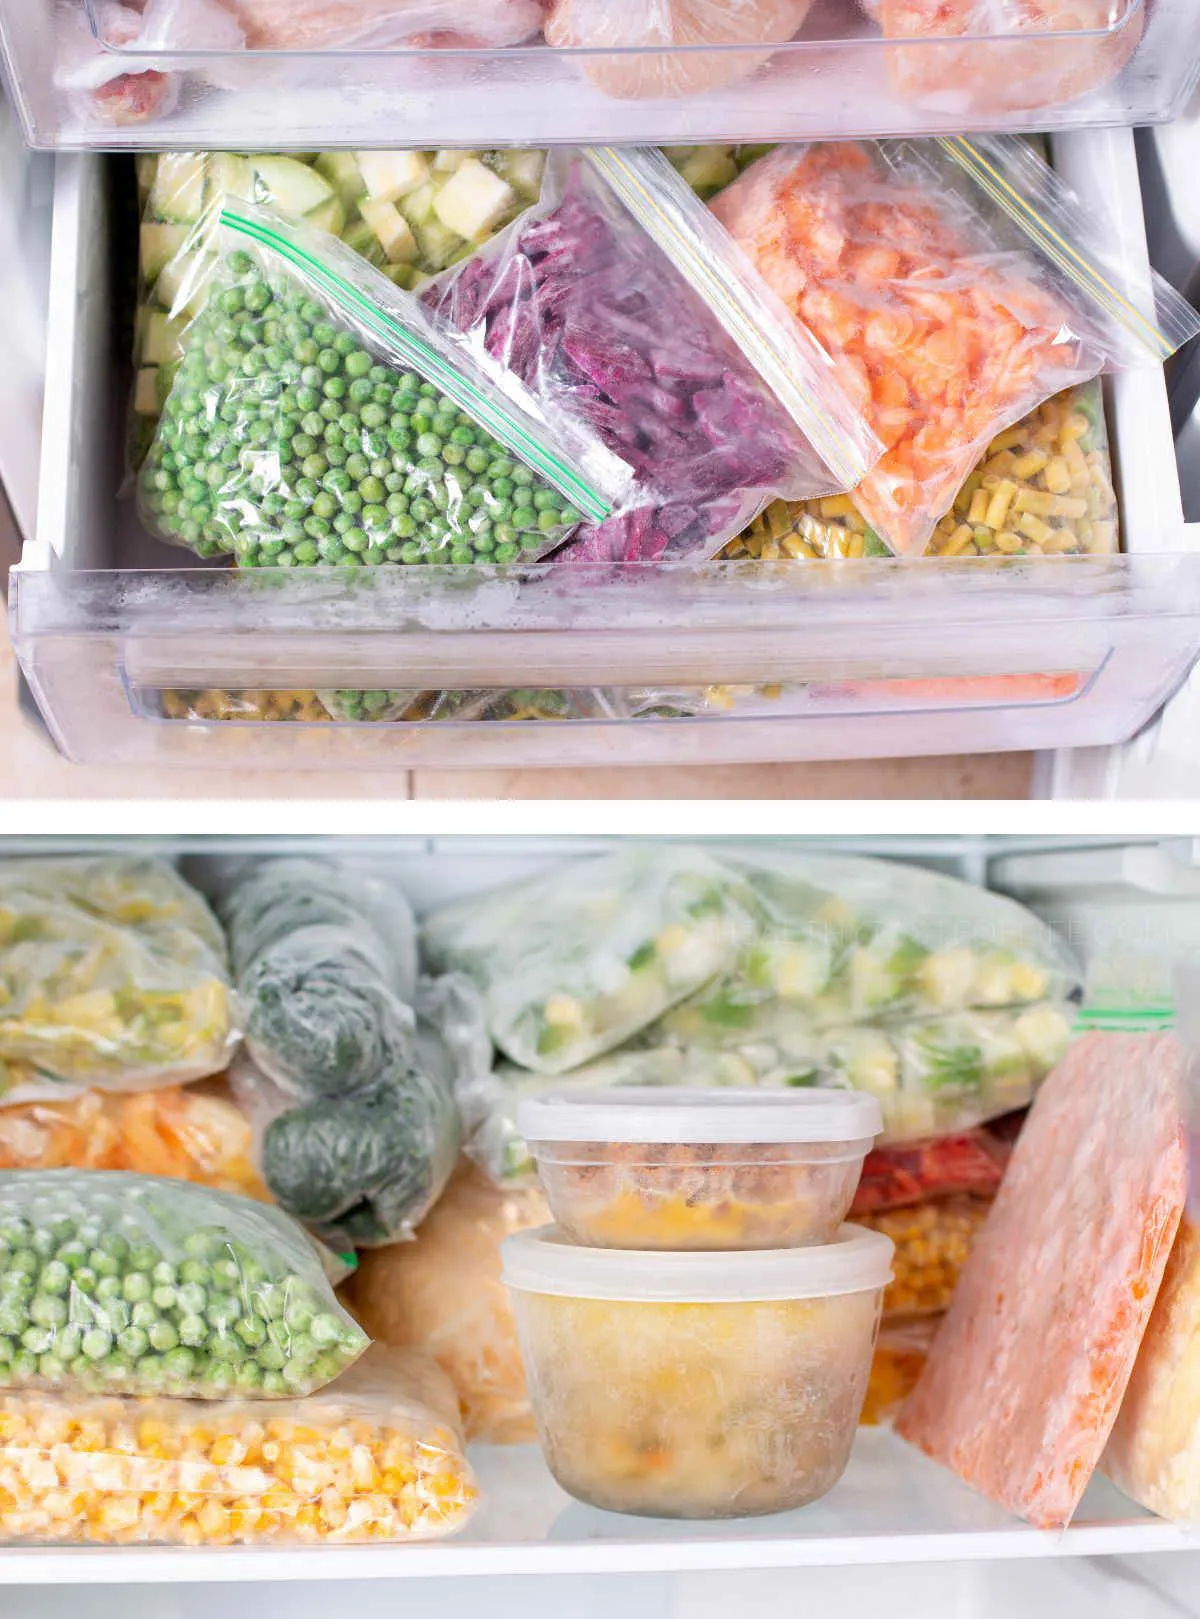 Frozen produce to be used as meal prep and planning.